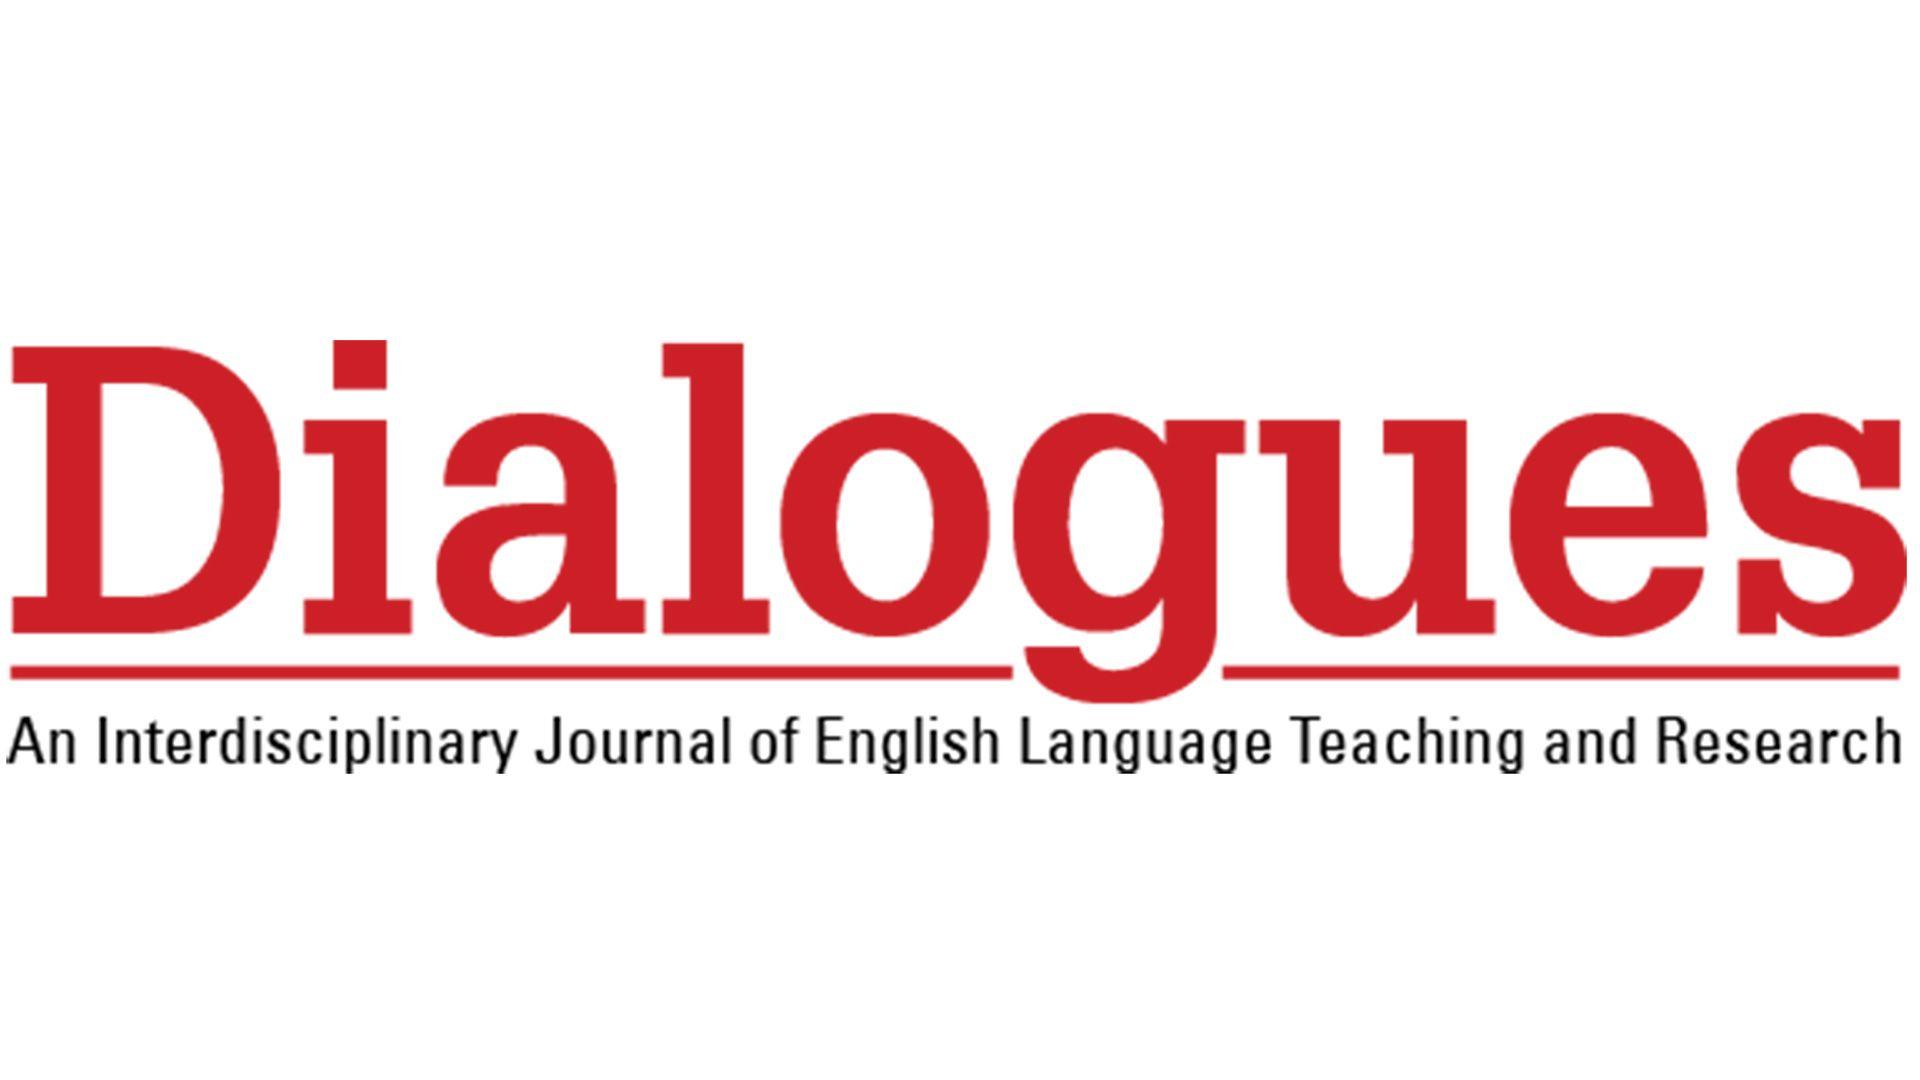 Red Foreign Language Logo - New Scholarly Journal for English Language Teaching and Research